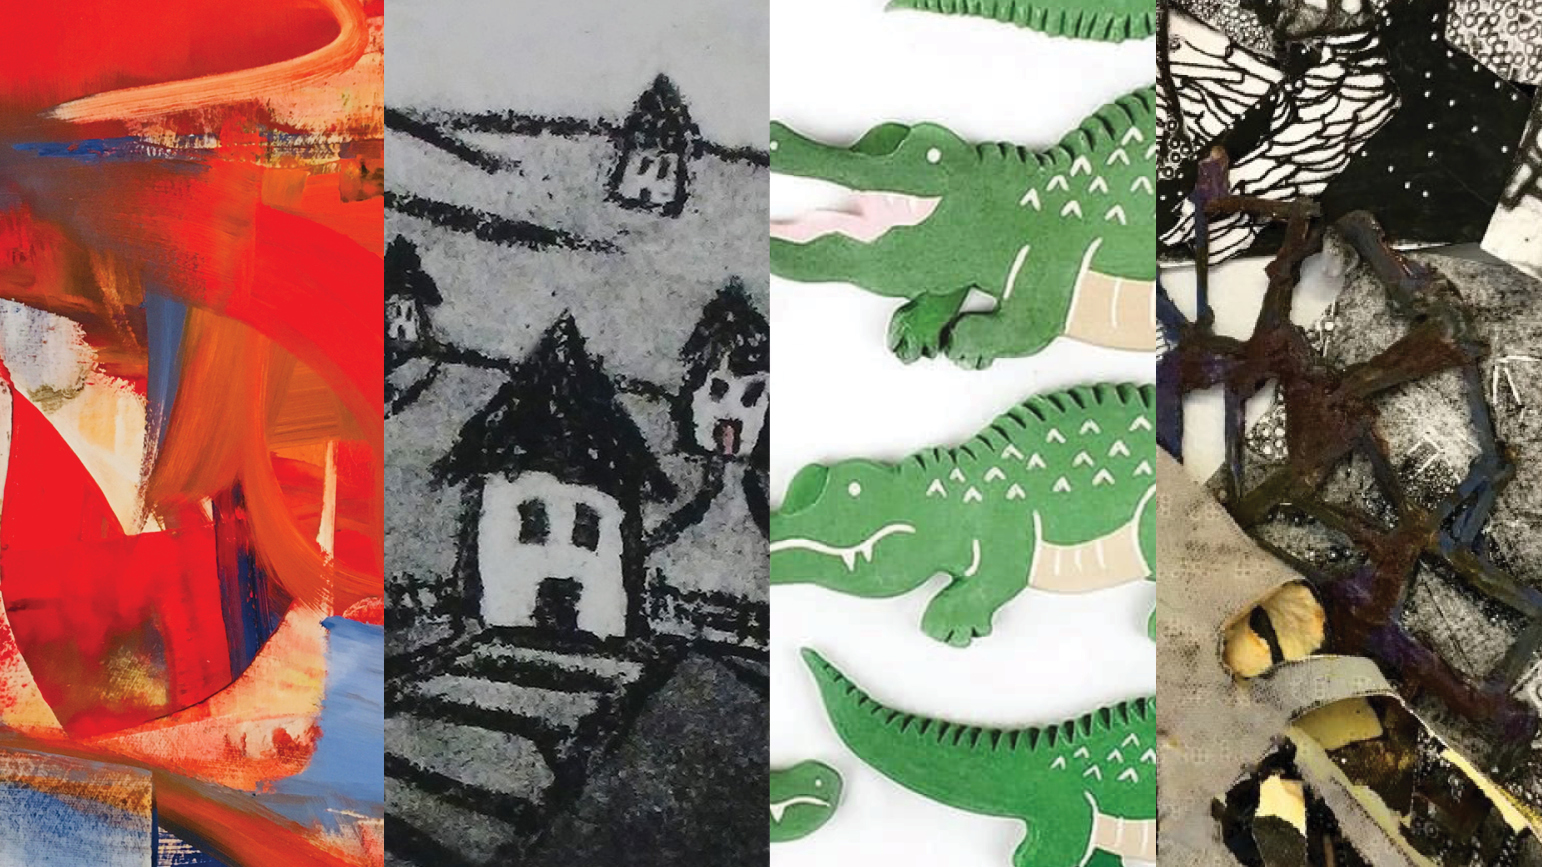 4 images: 1. abstract painting; 2. black and white simple drawing of houses; 3. photograph of alligator pins; 4. Abstract textile work